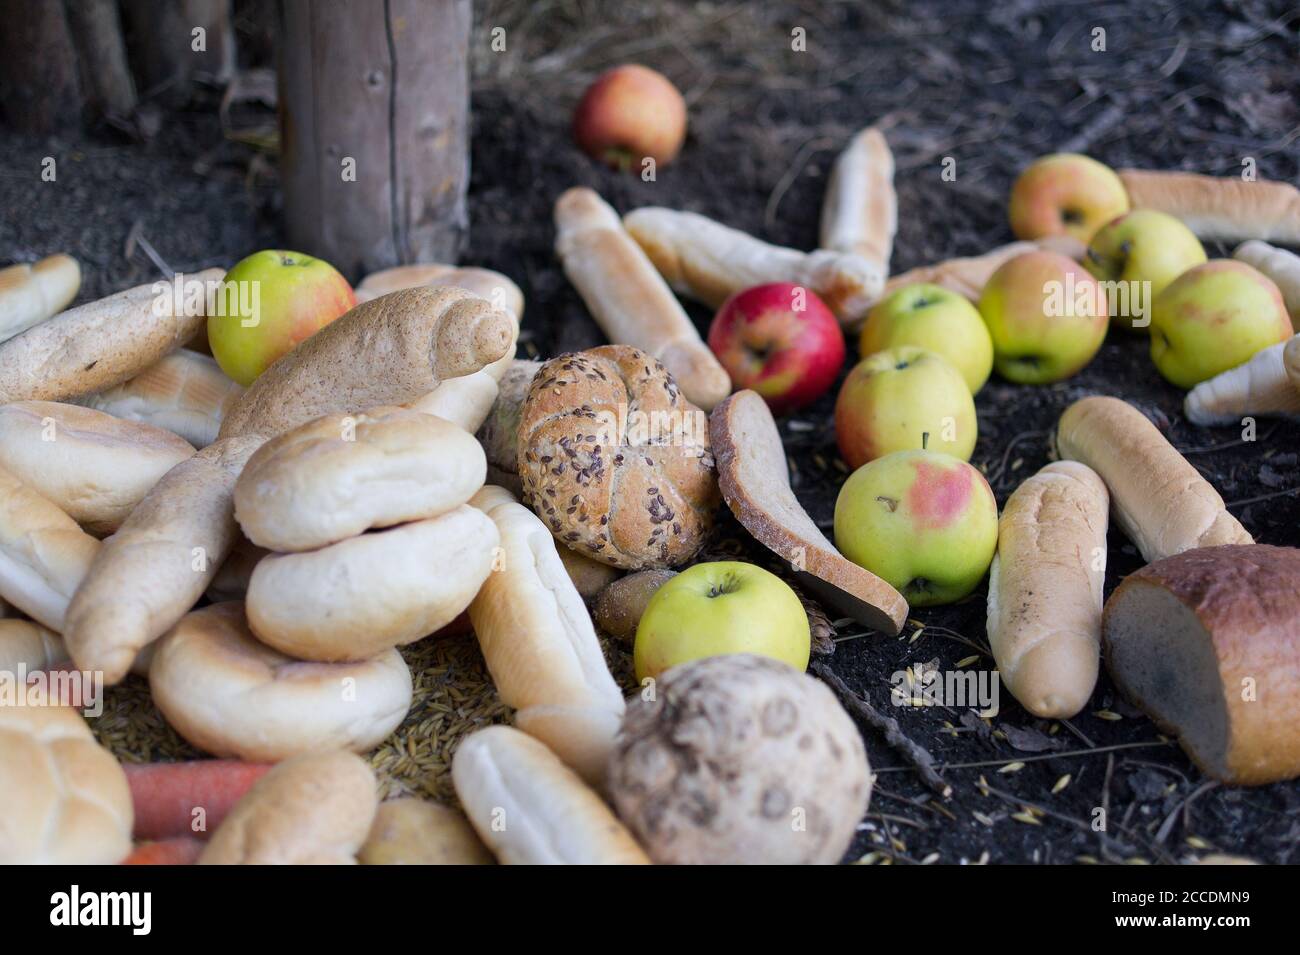 Food for feeding animal in the forest or farm. Vegetable, fruit, baked goods and bread in the feeder on the ground. Leaves, branches and dirty ground Stock Photo